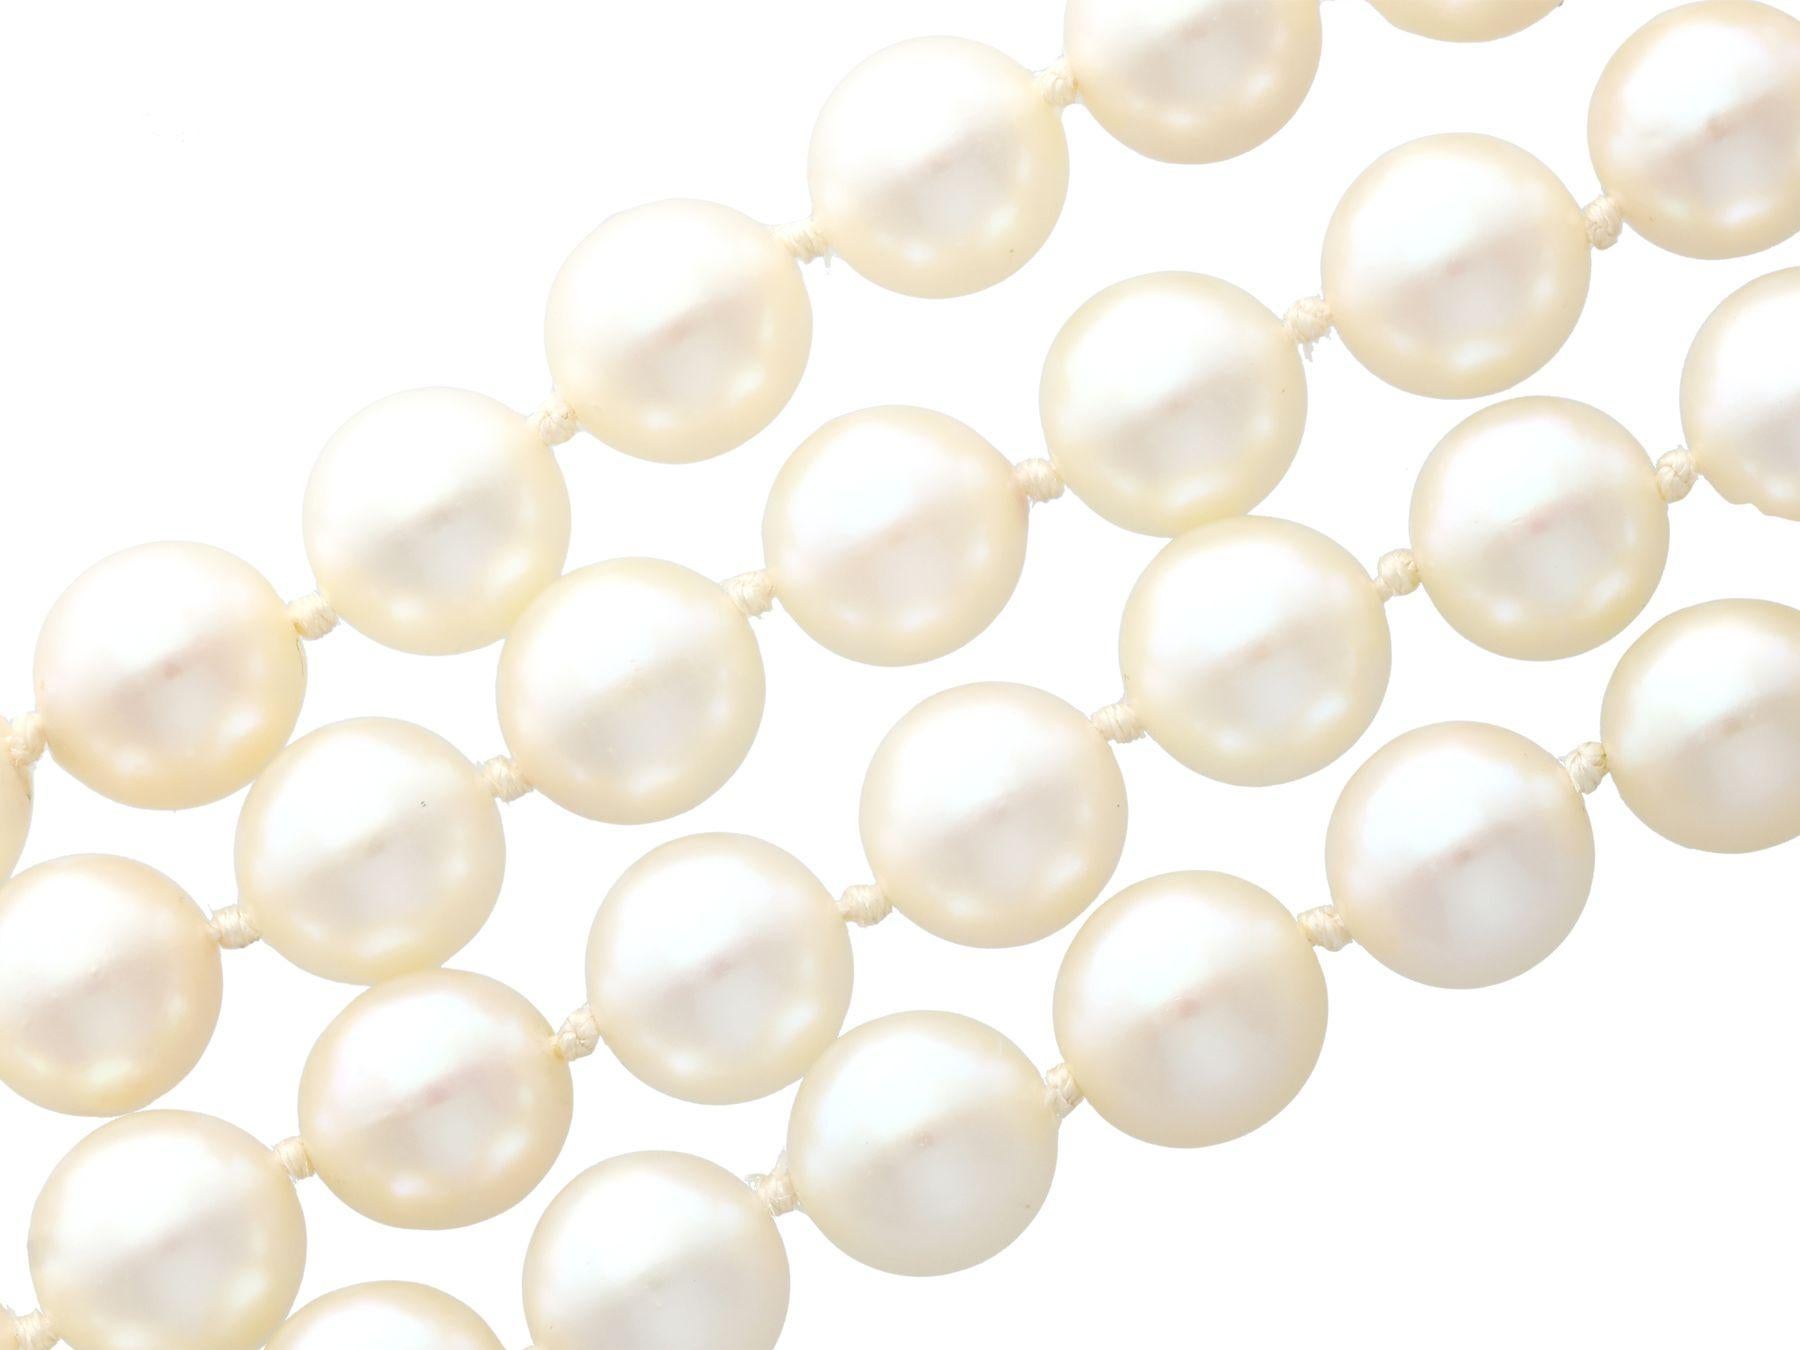 A fine and impressive double strand pearl necklace with a pearl. 0.30 carat diamond and 14 karat white gold clasp; part of our diverse pearl jewellery collections.

This fine and impressive vintage double strand pearl necklace has been crafted in